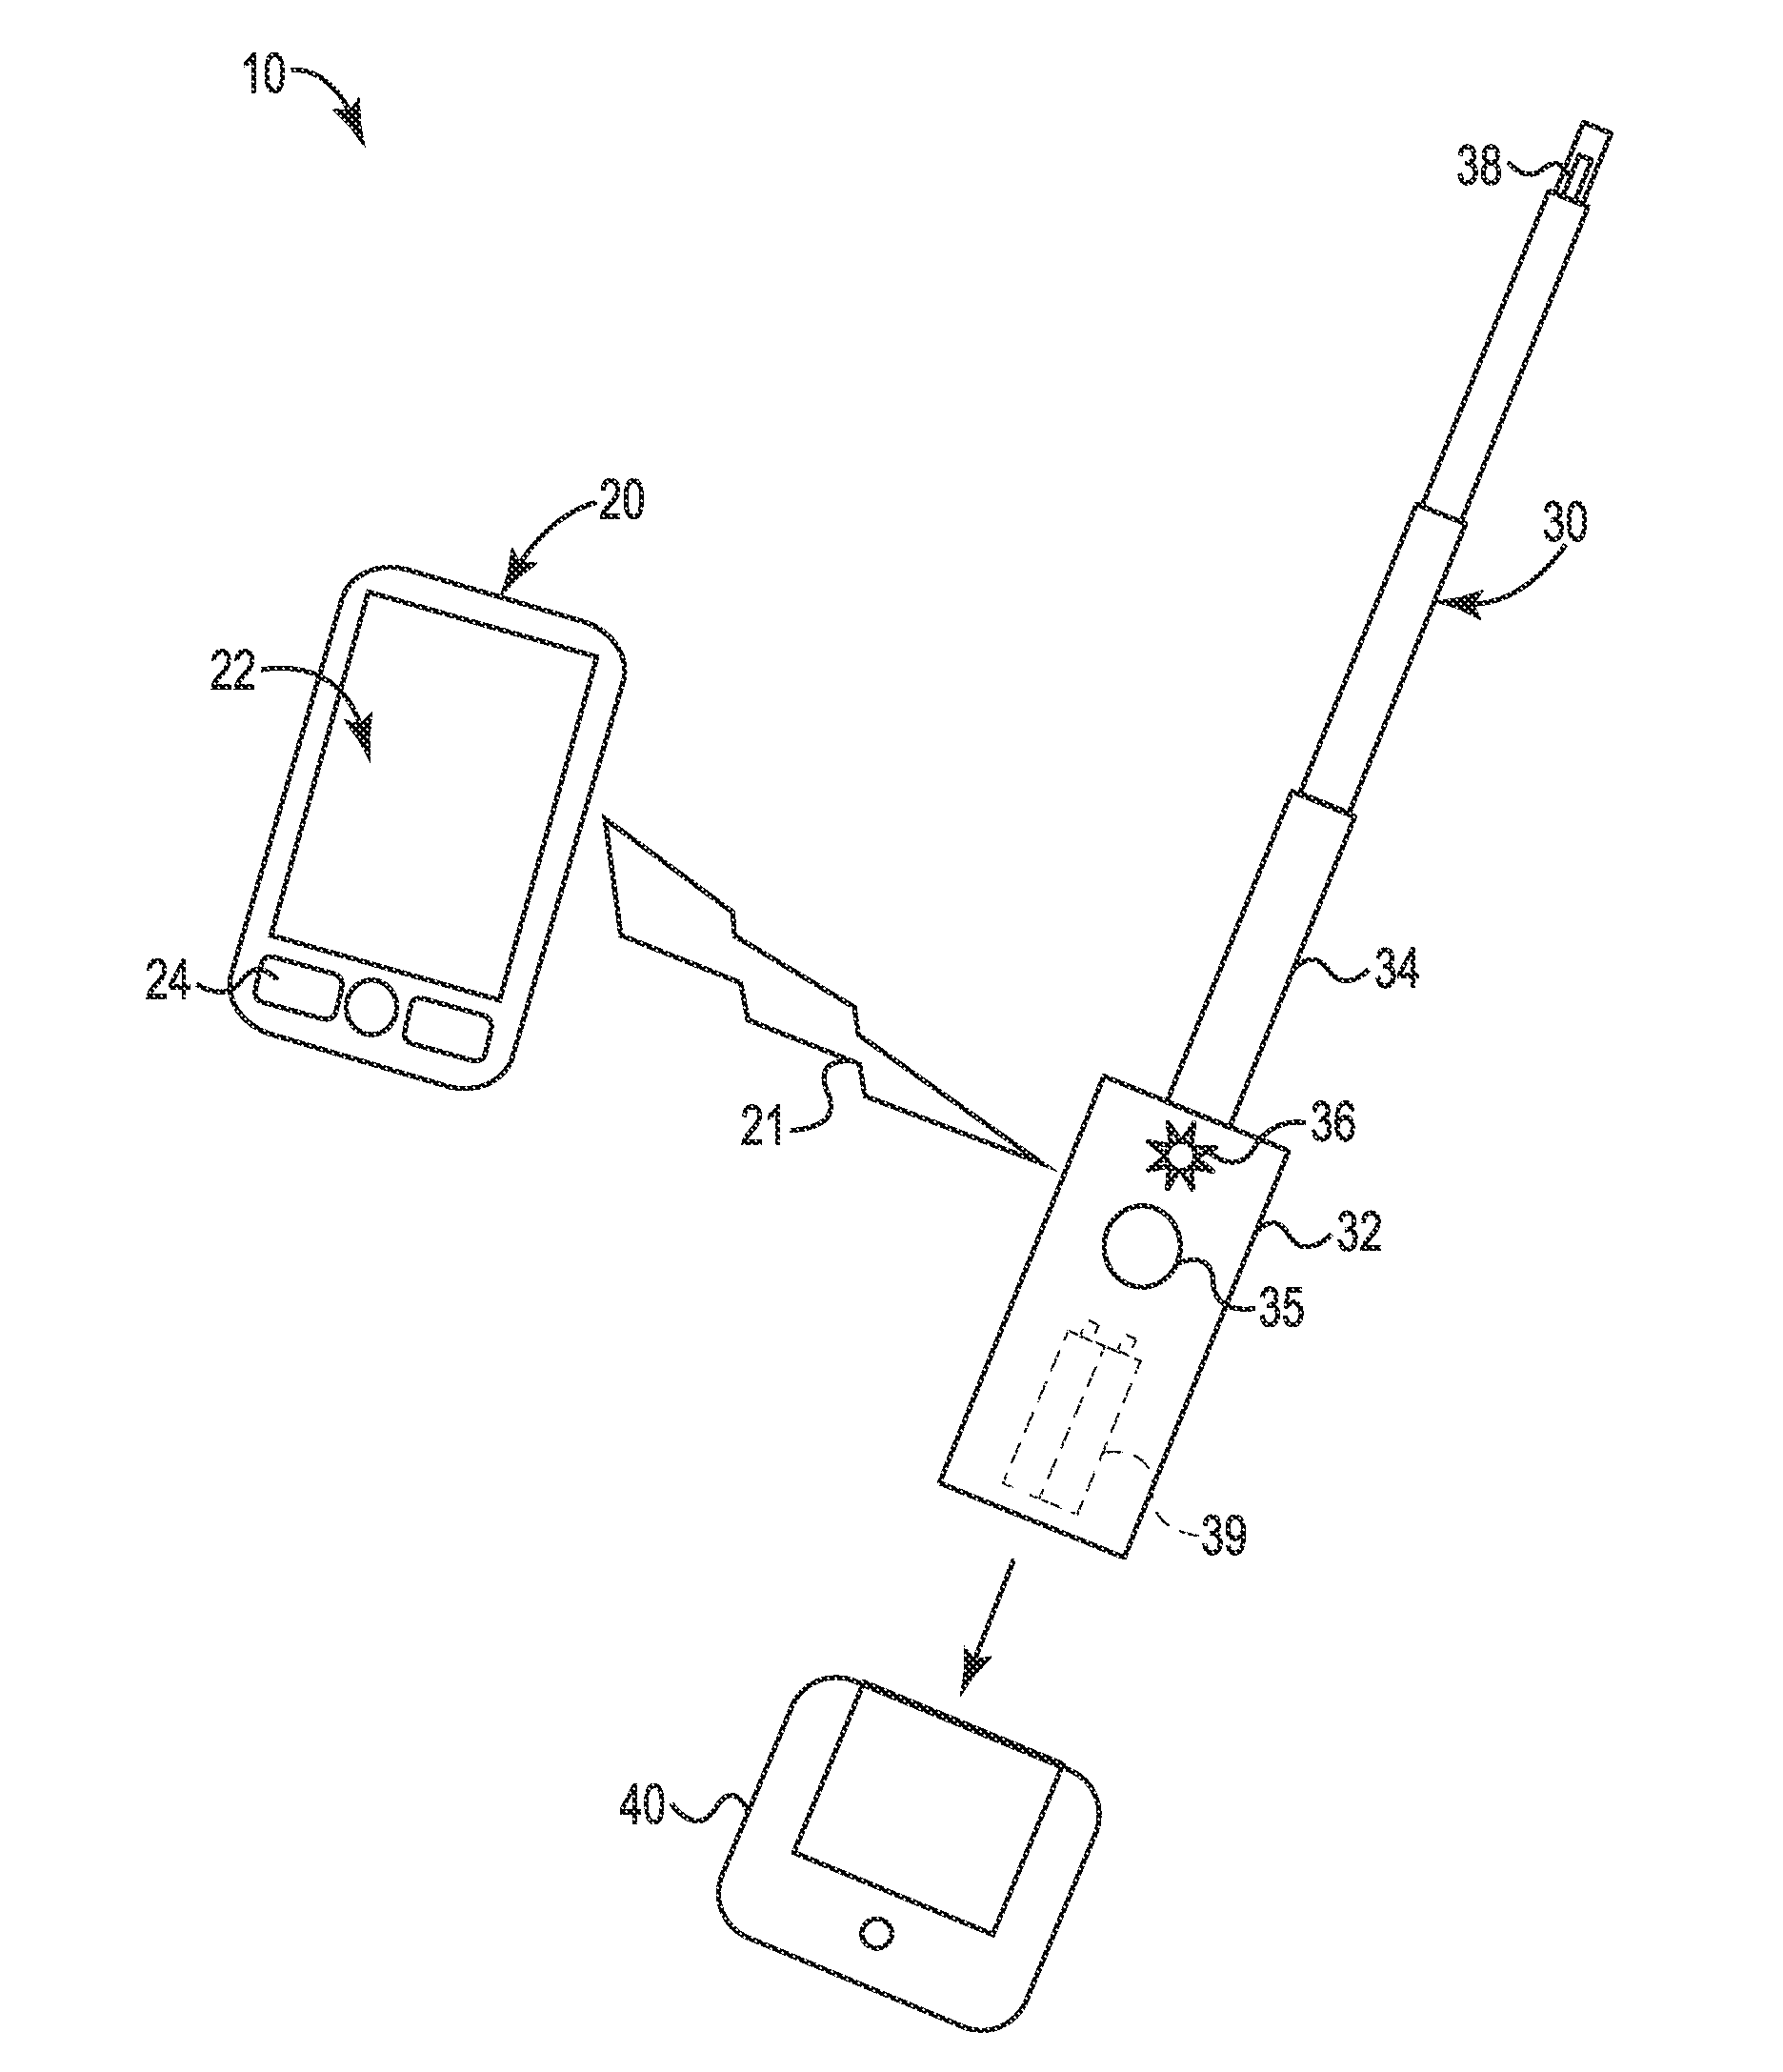 System and apparatus for using a wireless smart device to perform field calculations